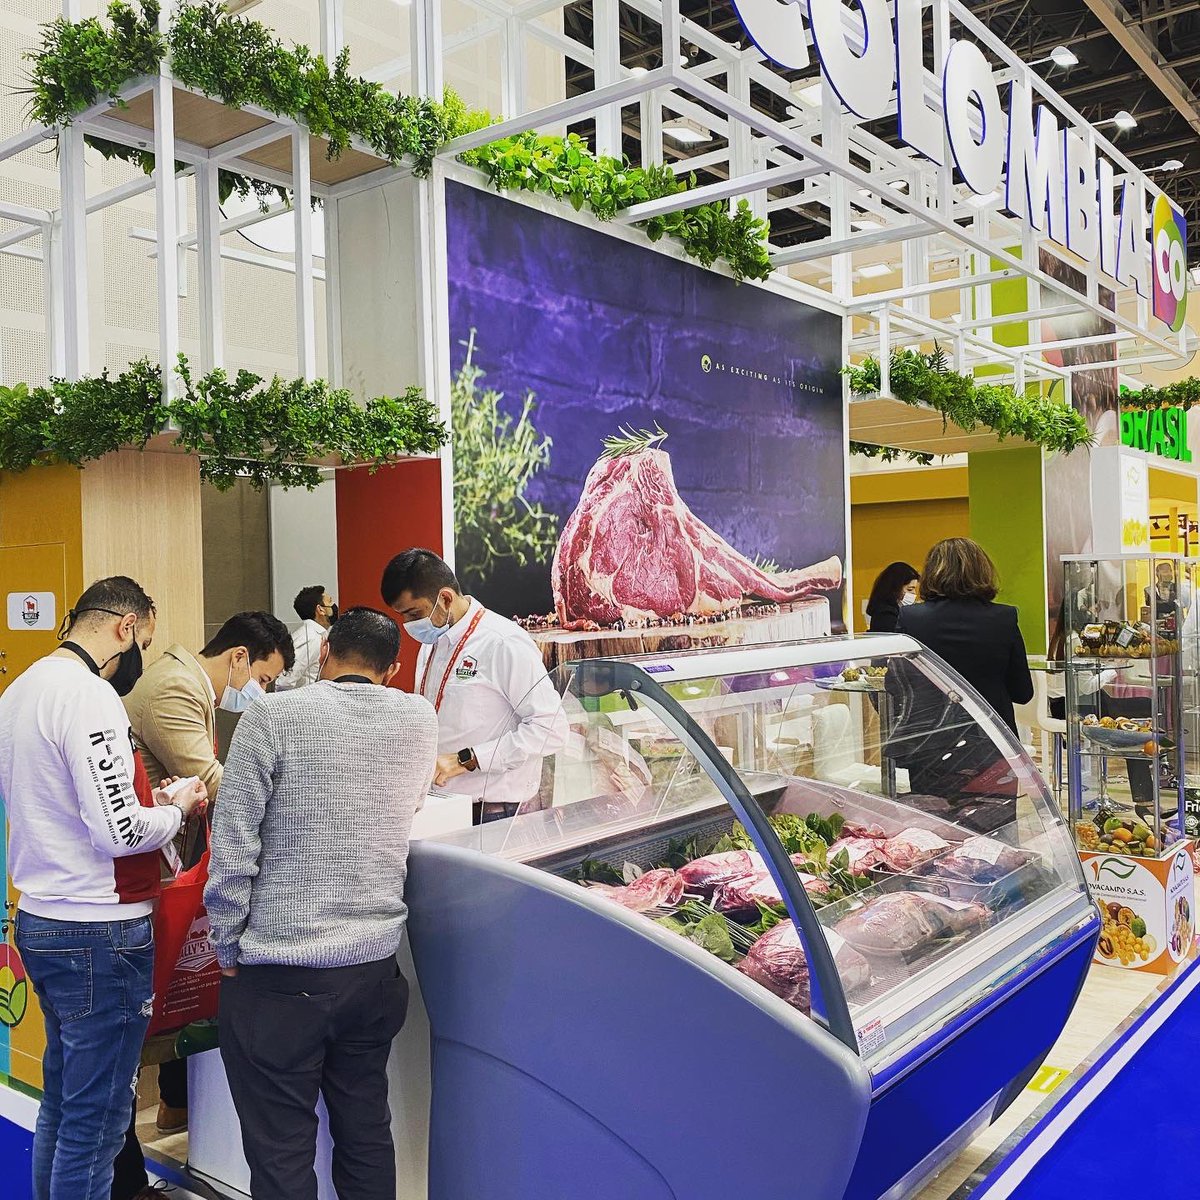 Colombian exporters are exhibiting their #exciting products at #gulfood2021, the first in-person exhibition this year. For 5 days, buyers will discover Colombian #meat #exoticfruits #superfoods #snacks #coffee #instantcoffee #cocoa @PROCOLOMBIACO @JulianaVillegas @andrescrtg